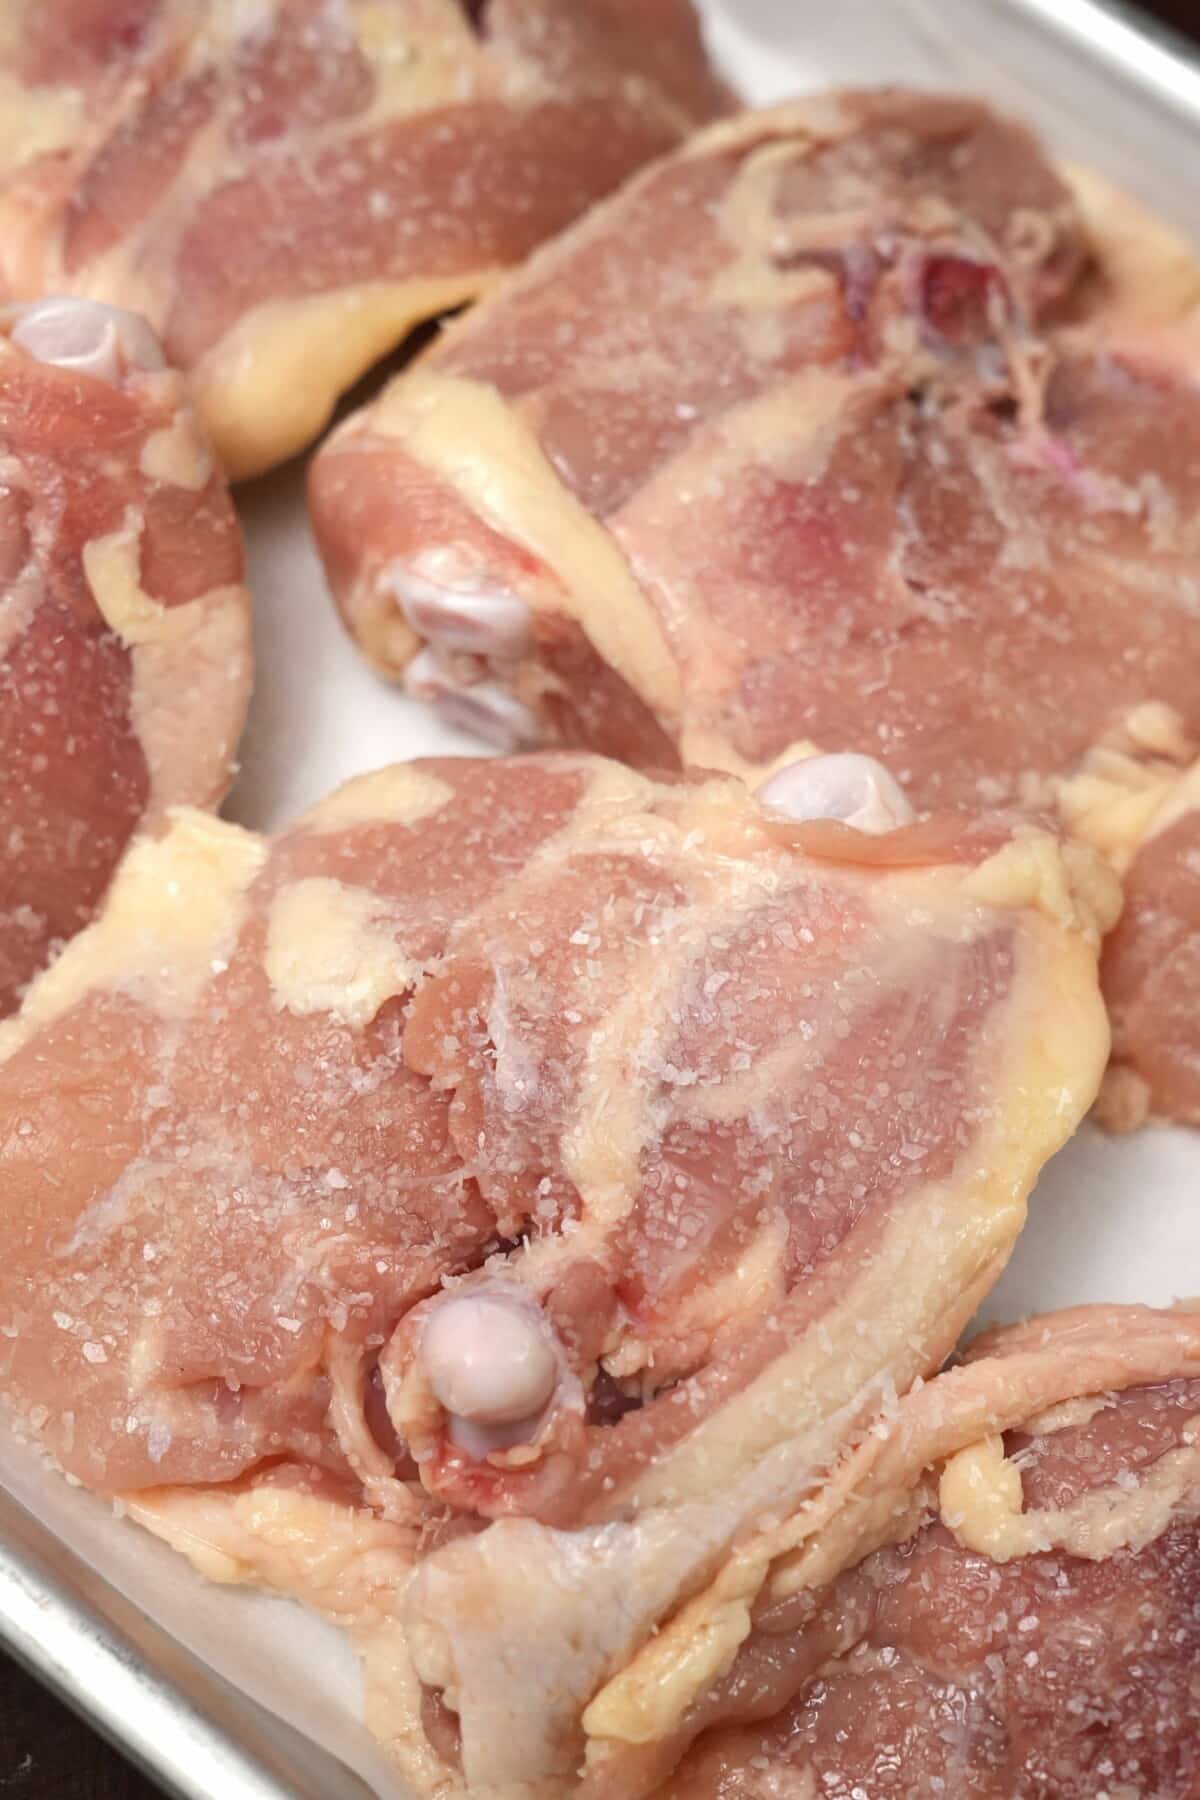 Bone-in chicken thighs skin side down on a tray seasoned with kosher salt on the meat side.